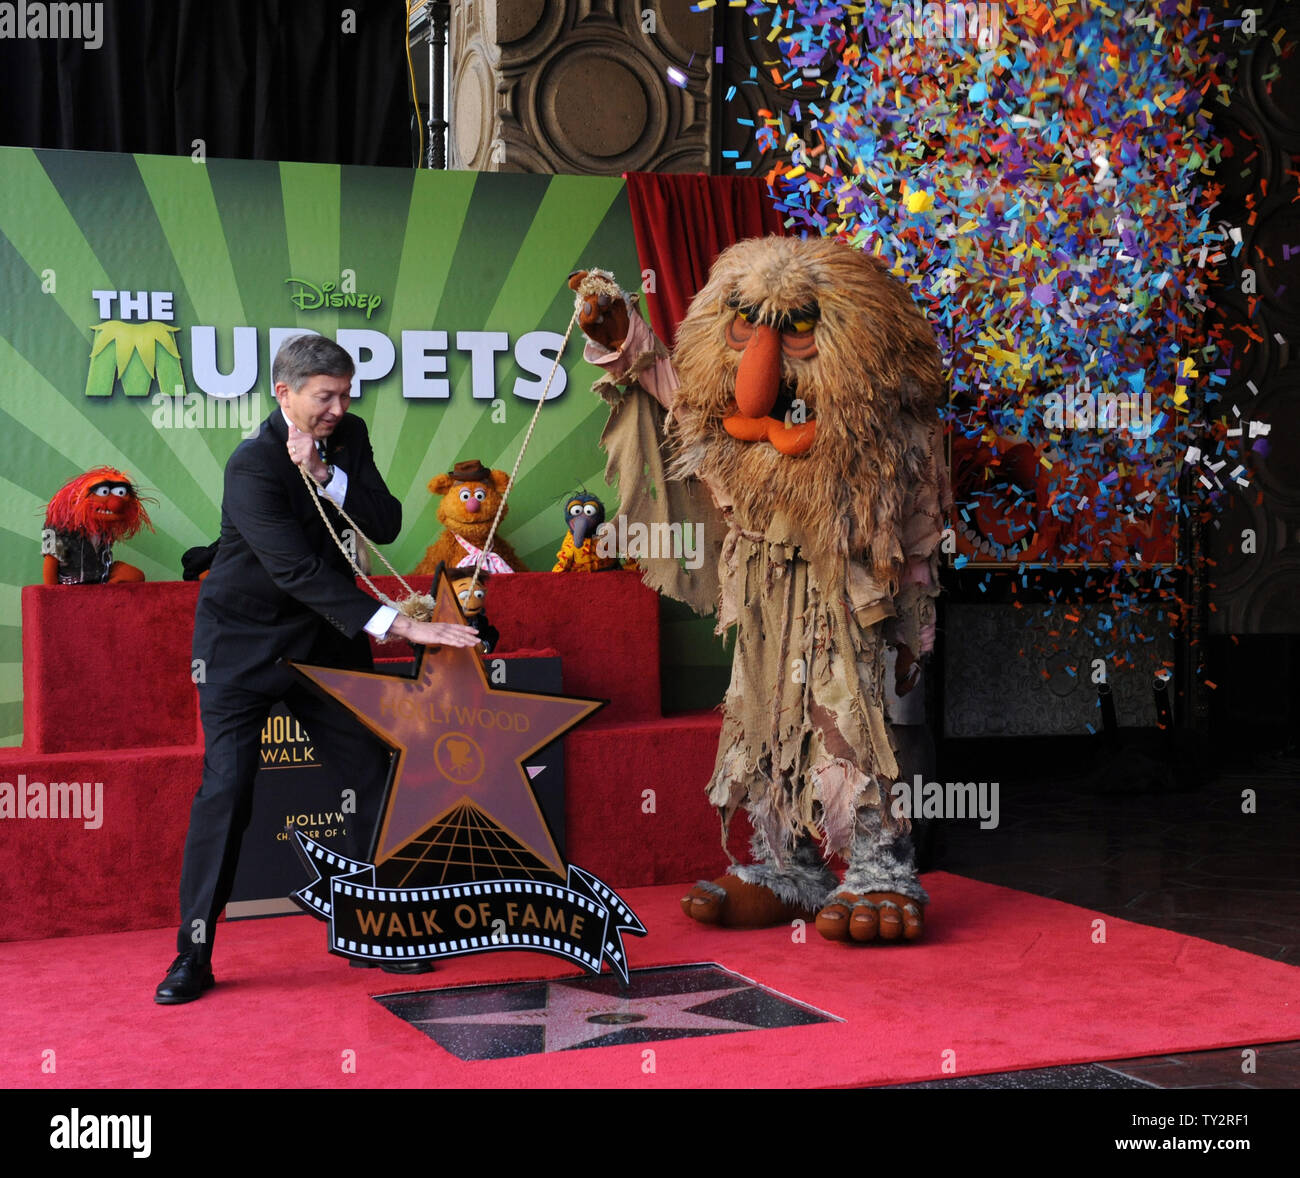 Sweetums (R) helps Hollywood Chamber of Commerce CEO Leron Gubler (L) during an unveiling ceremony honoring The Muppets  with the 2,466th star on the Hollywood Walk of Fame in Los Angeles on March 20, 2012. UPI/Jim Ruymen Stock Photo